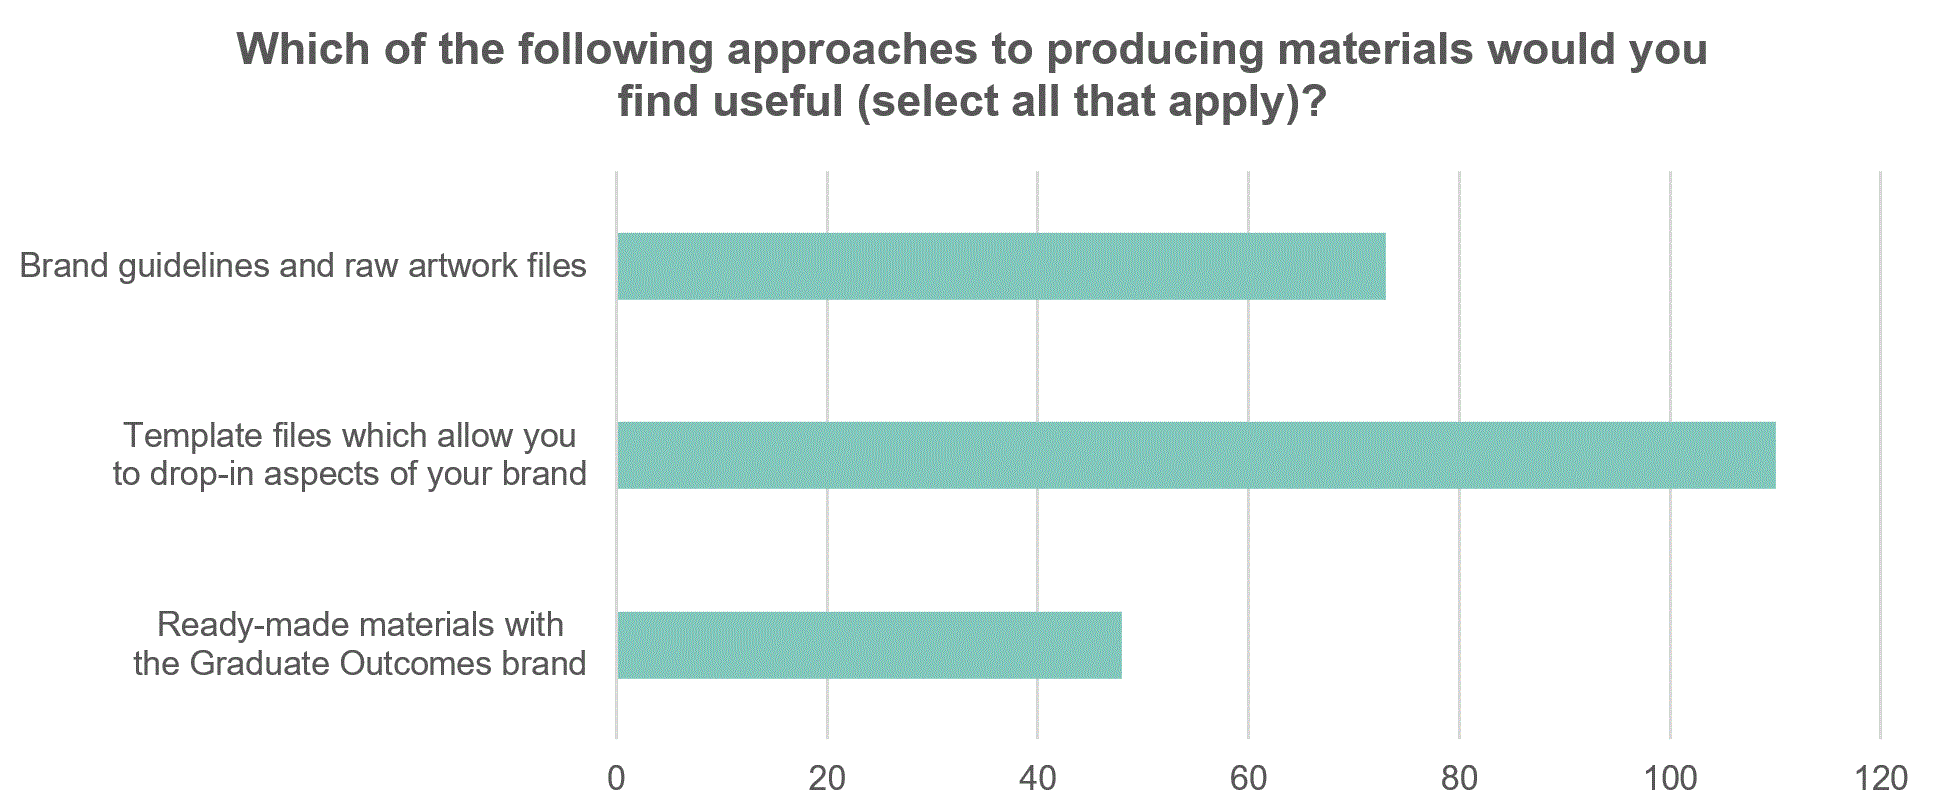 Chart 3 - Which of the following approaches to producing materials would you find useful (select all that apply)?